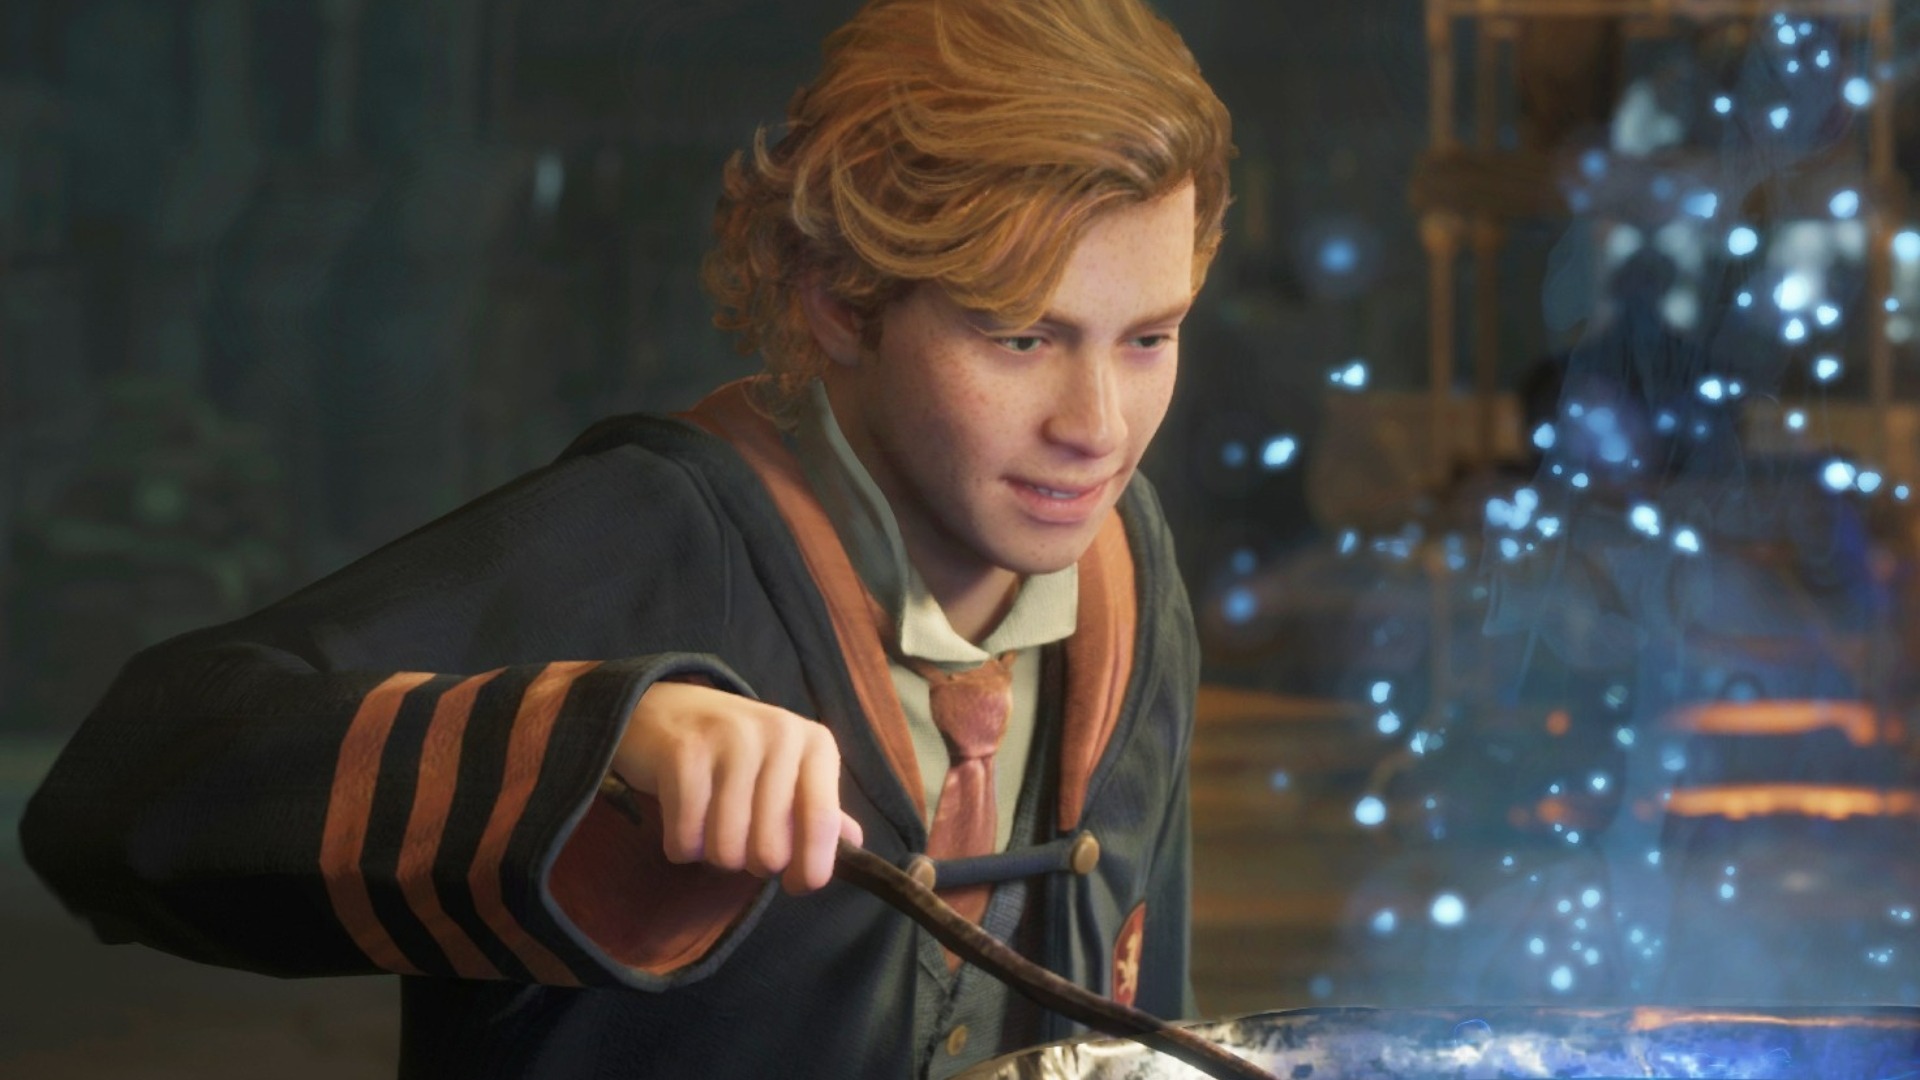 Here's when Hogwarts Legacy early access begins this week